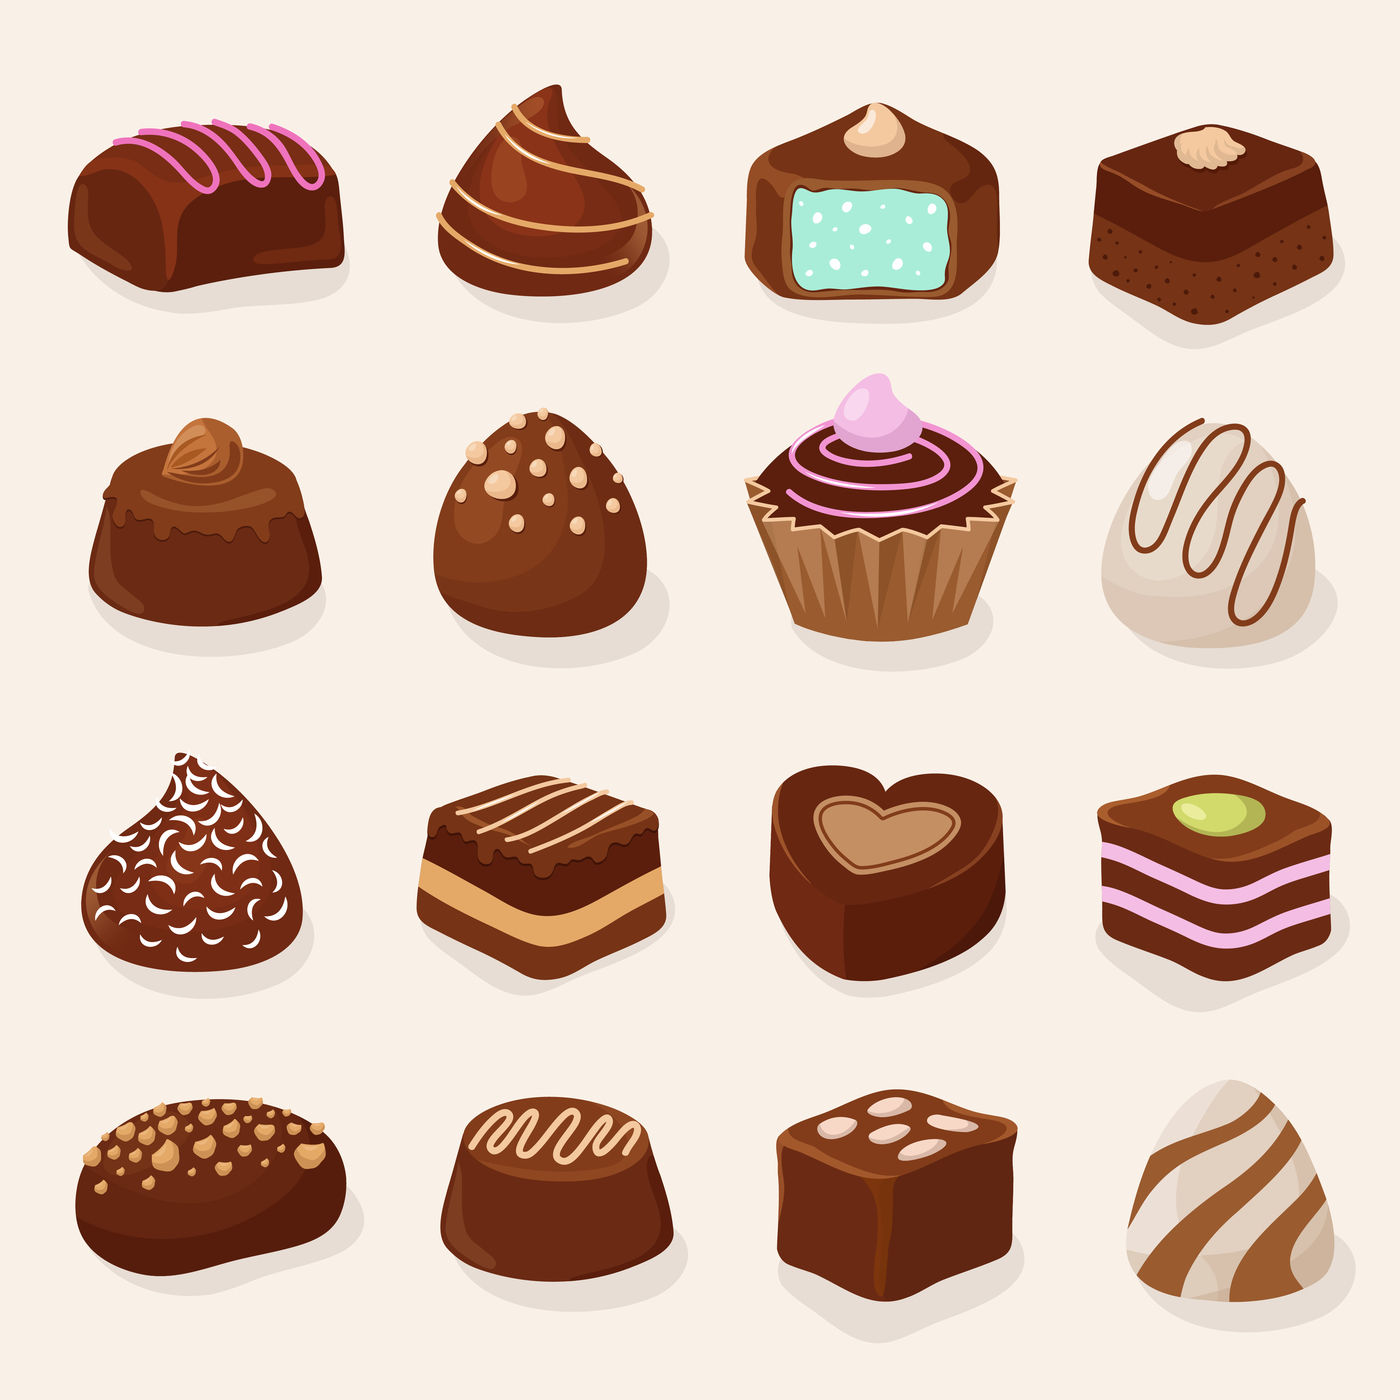 Cartoon chocolate desserts and candies vector set By Microvector